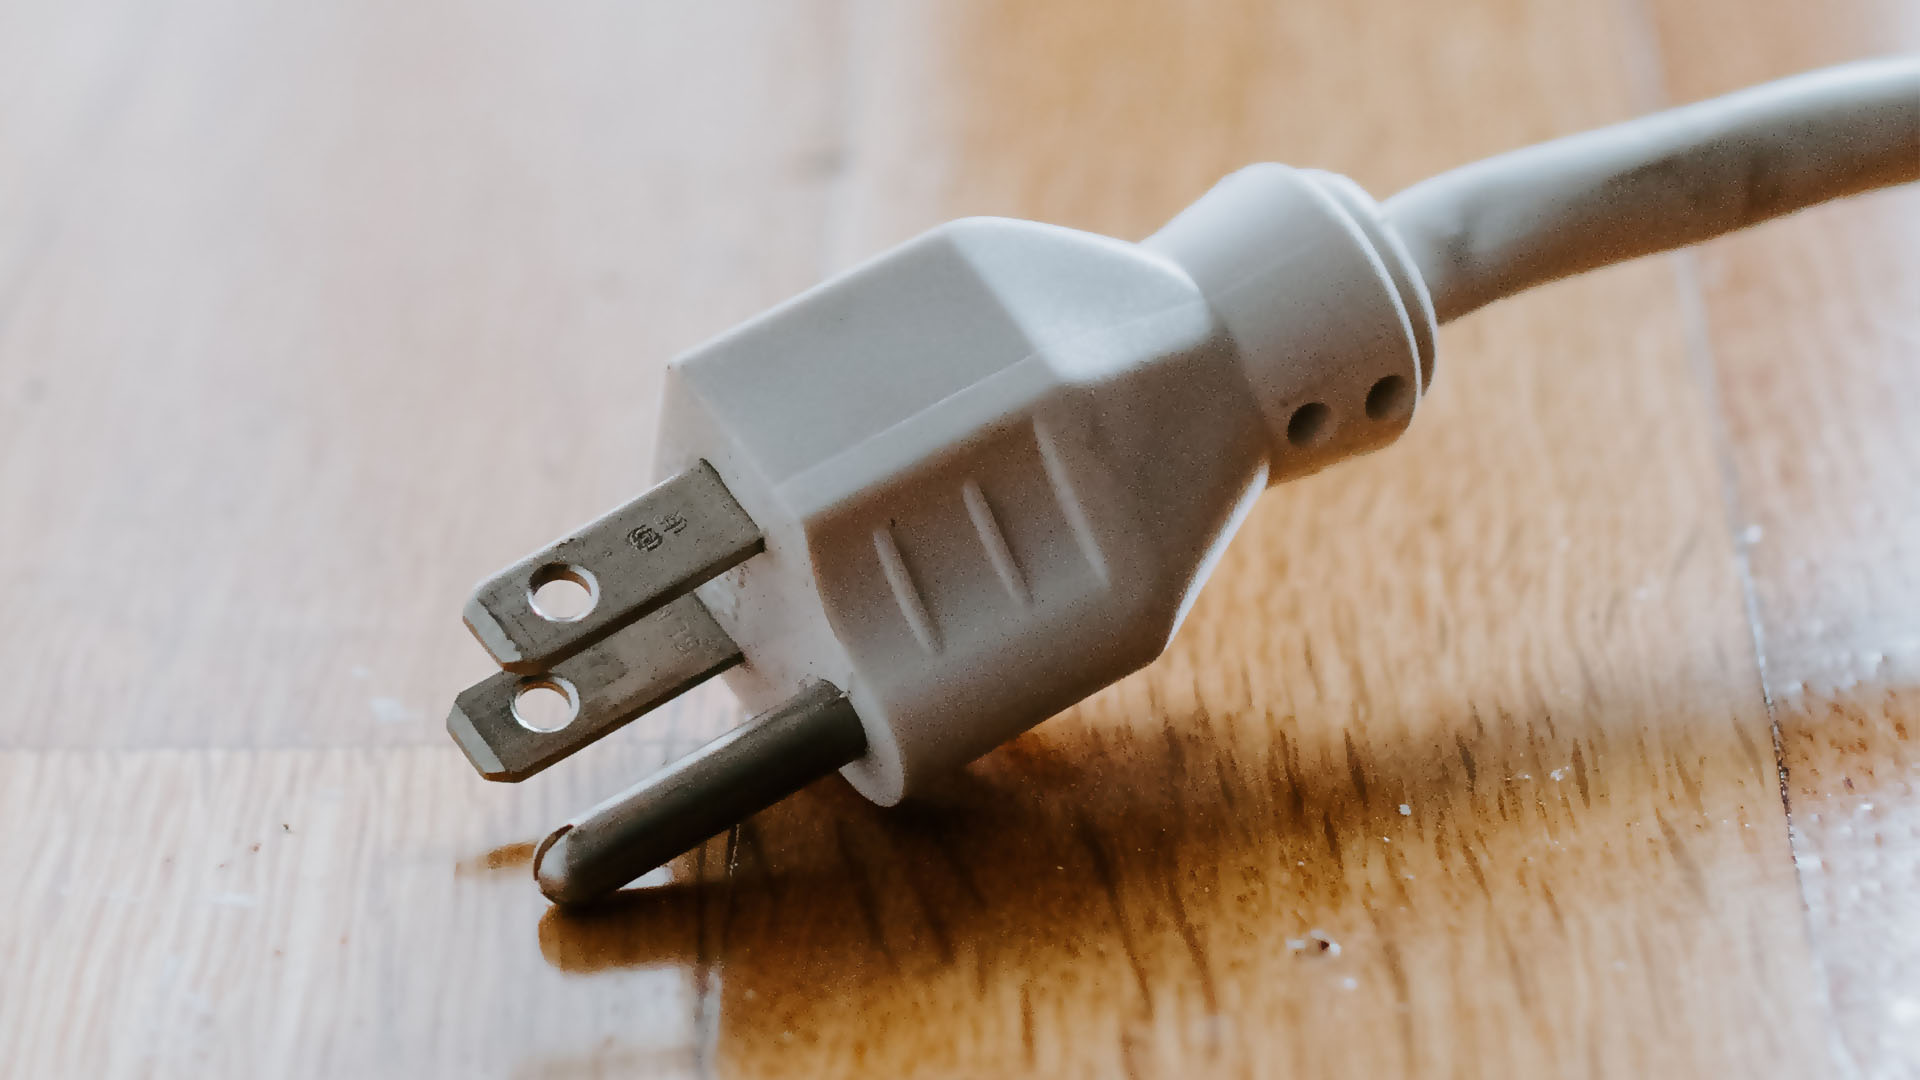 The best smart plugs of 2022